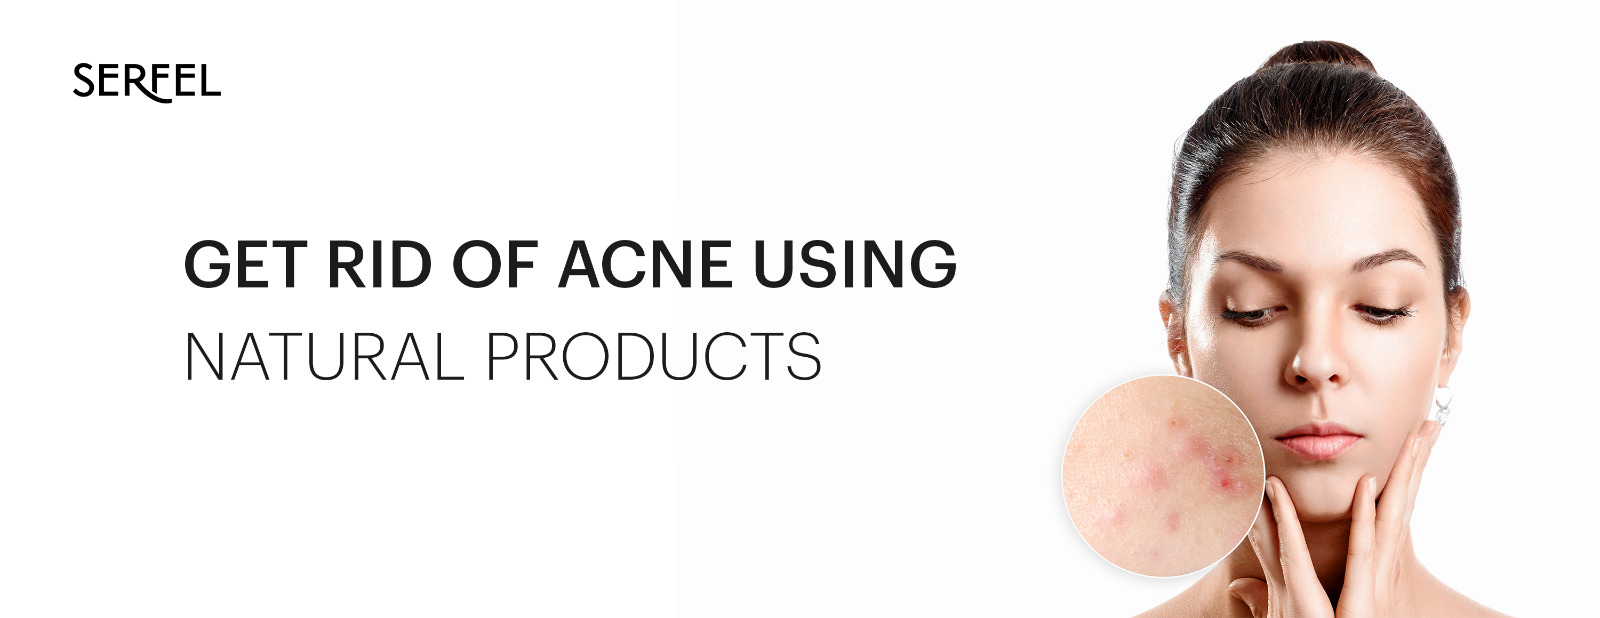 Get Rid of Acne Pores Using Natural Products